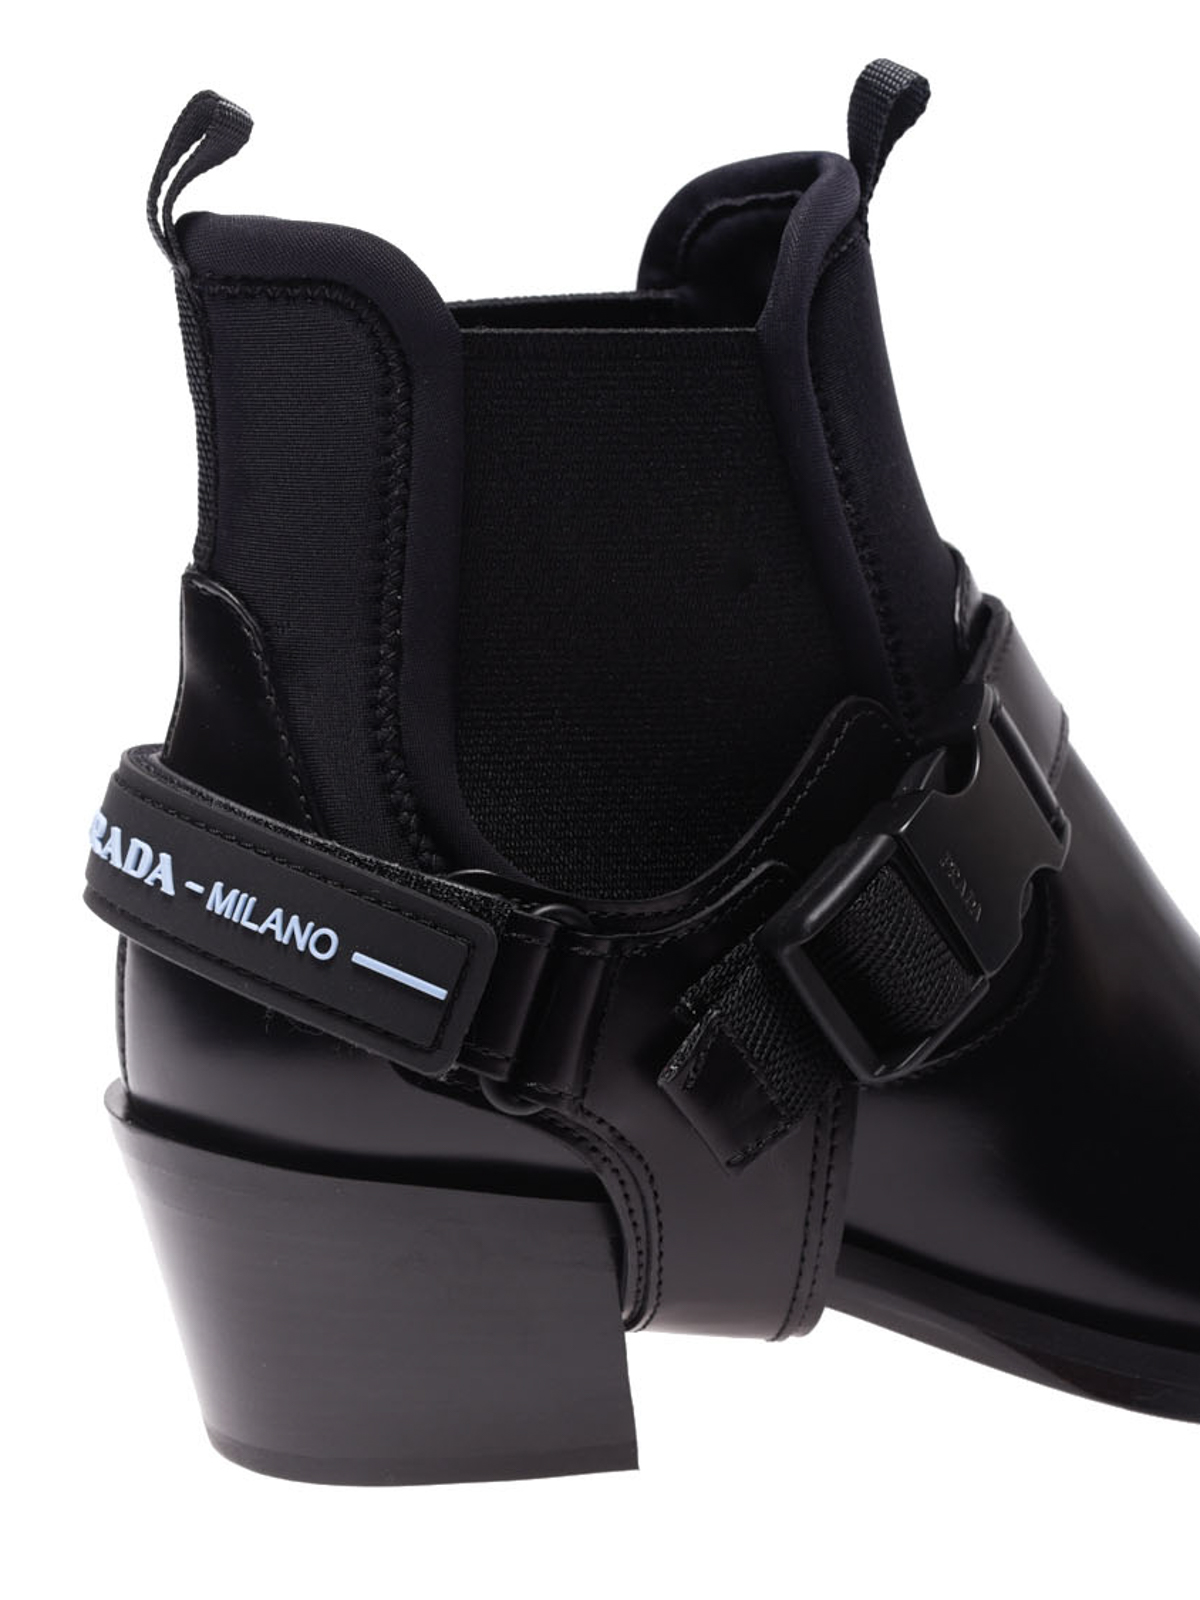 buckle strap ankle boots